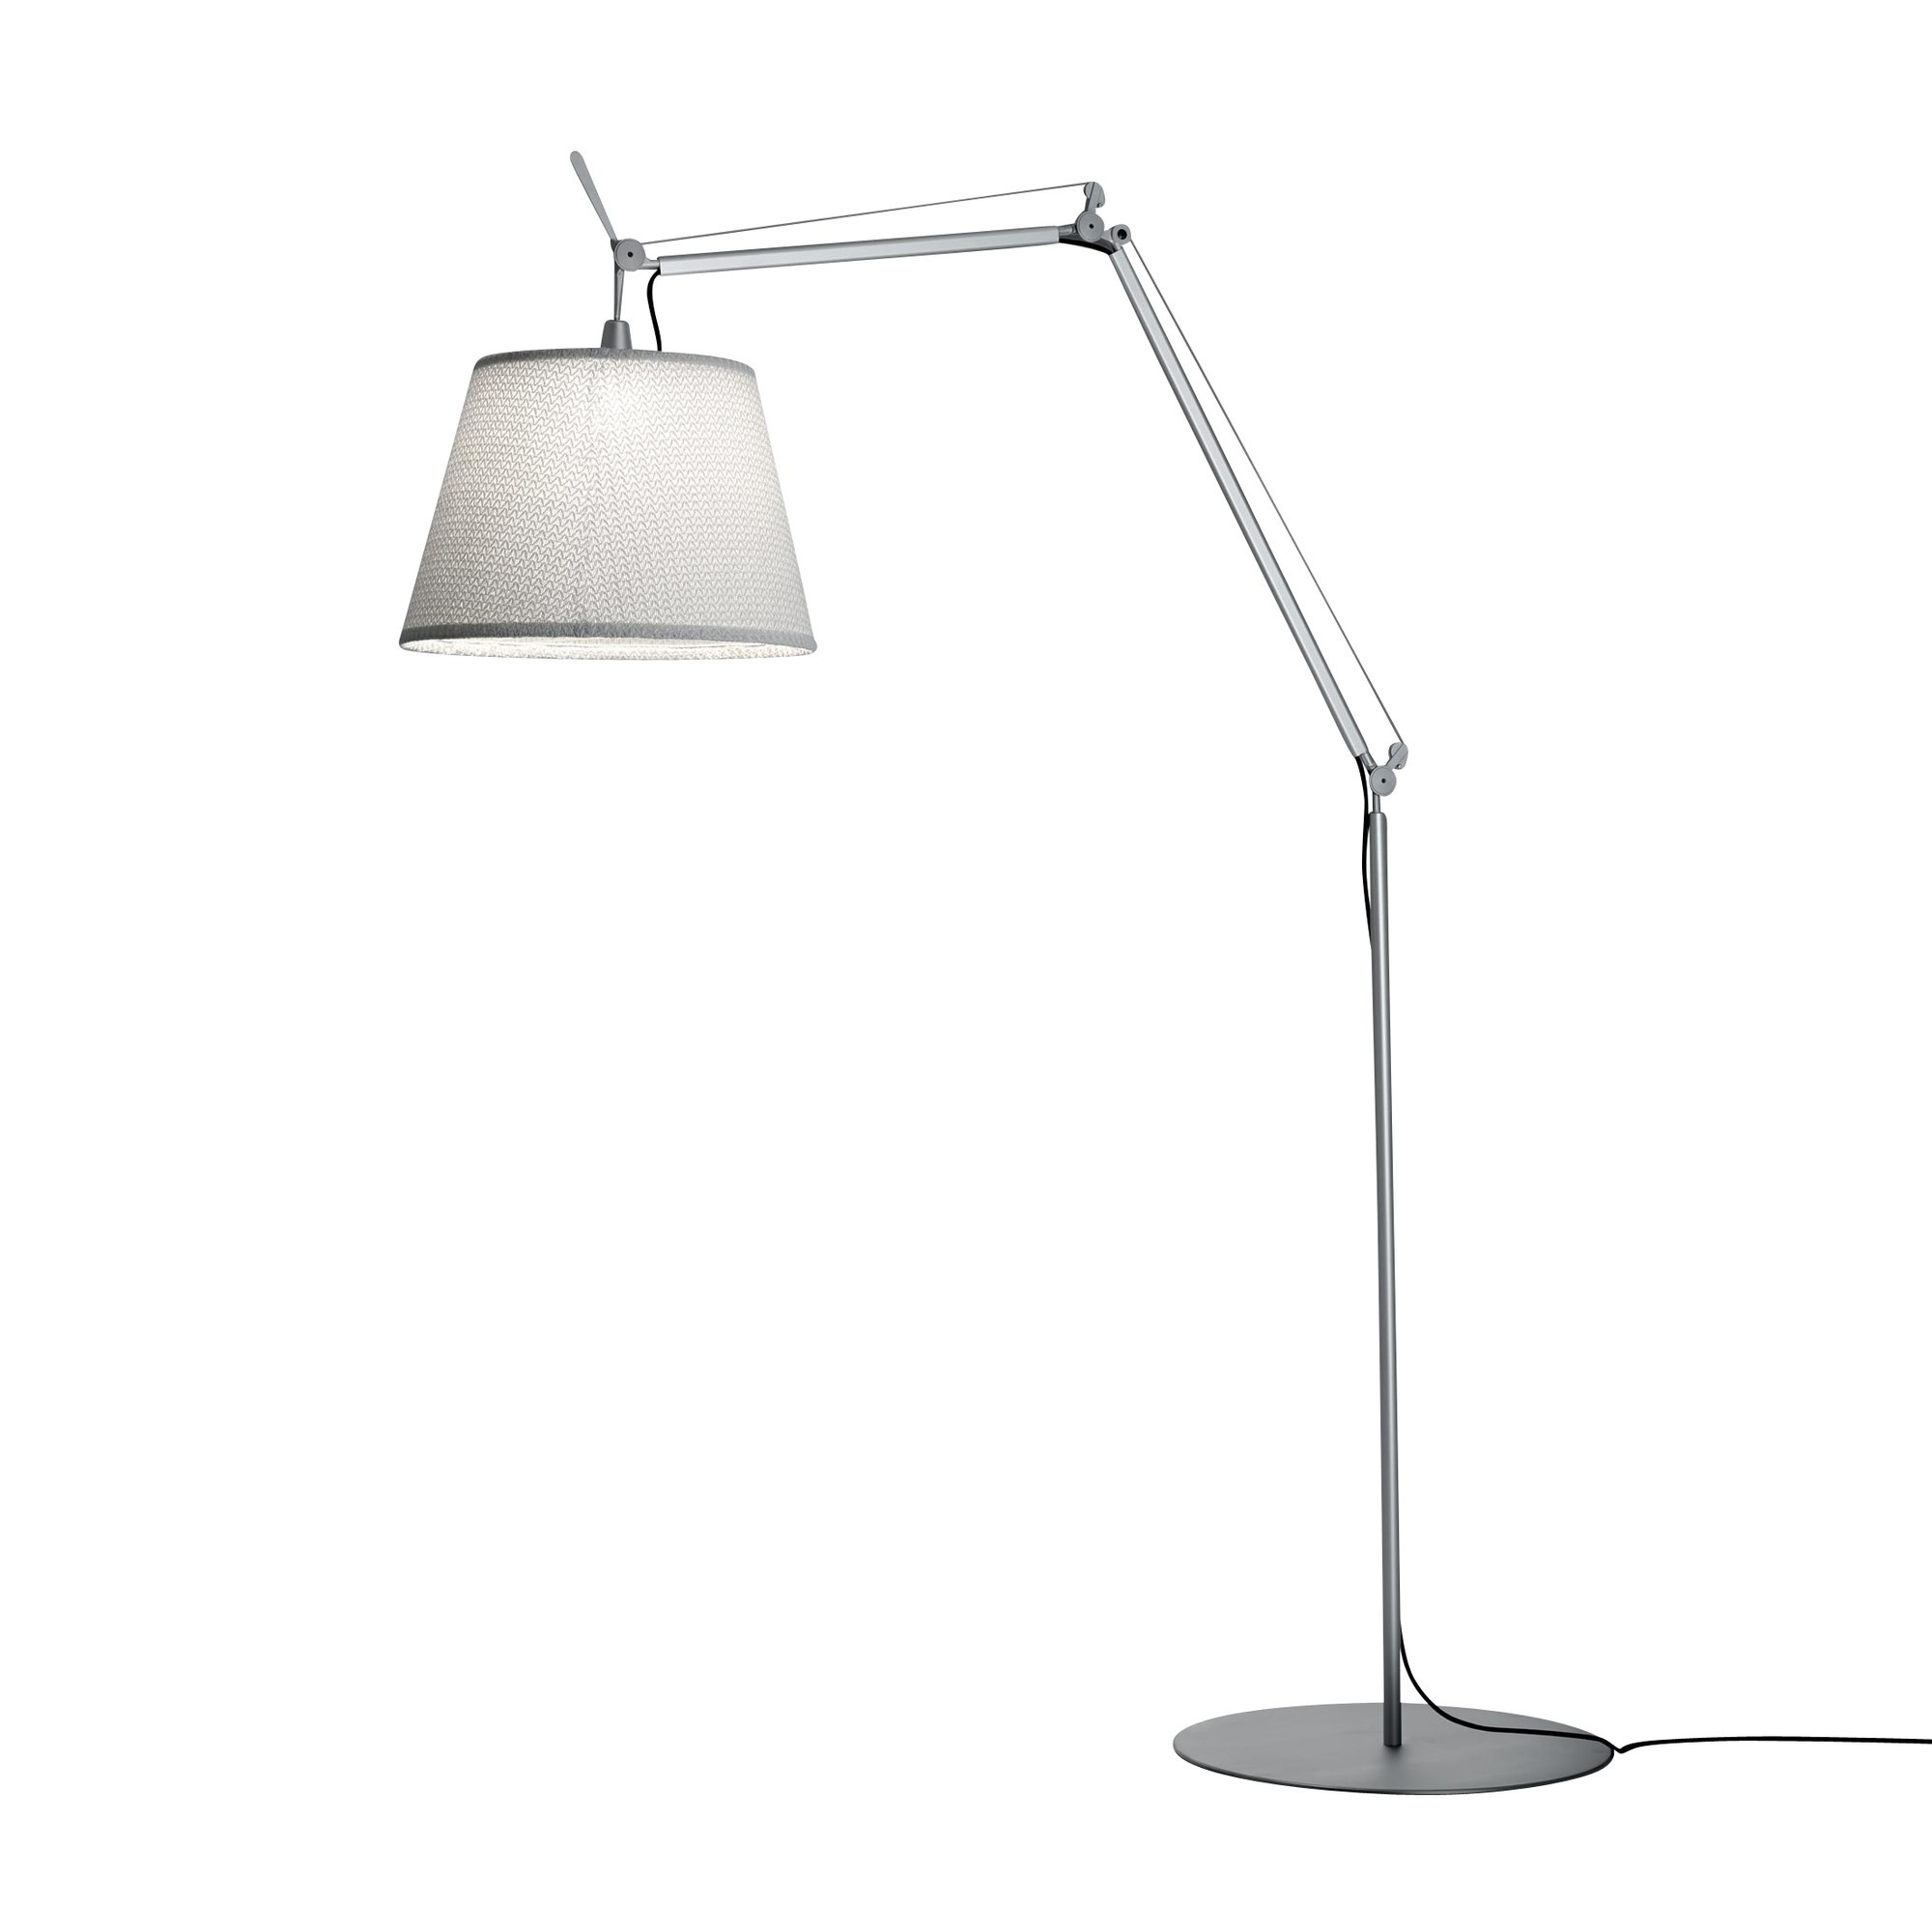 Tolomeo Paralume Led Outdoor Floor Lamp inside sizing 2000 X 2000